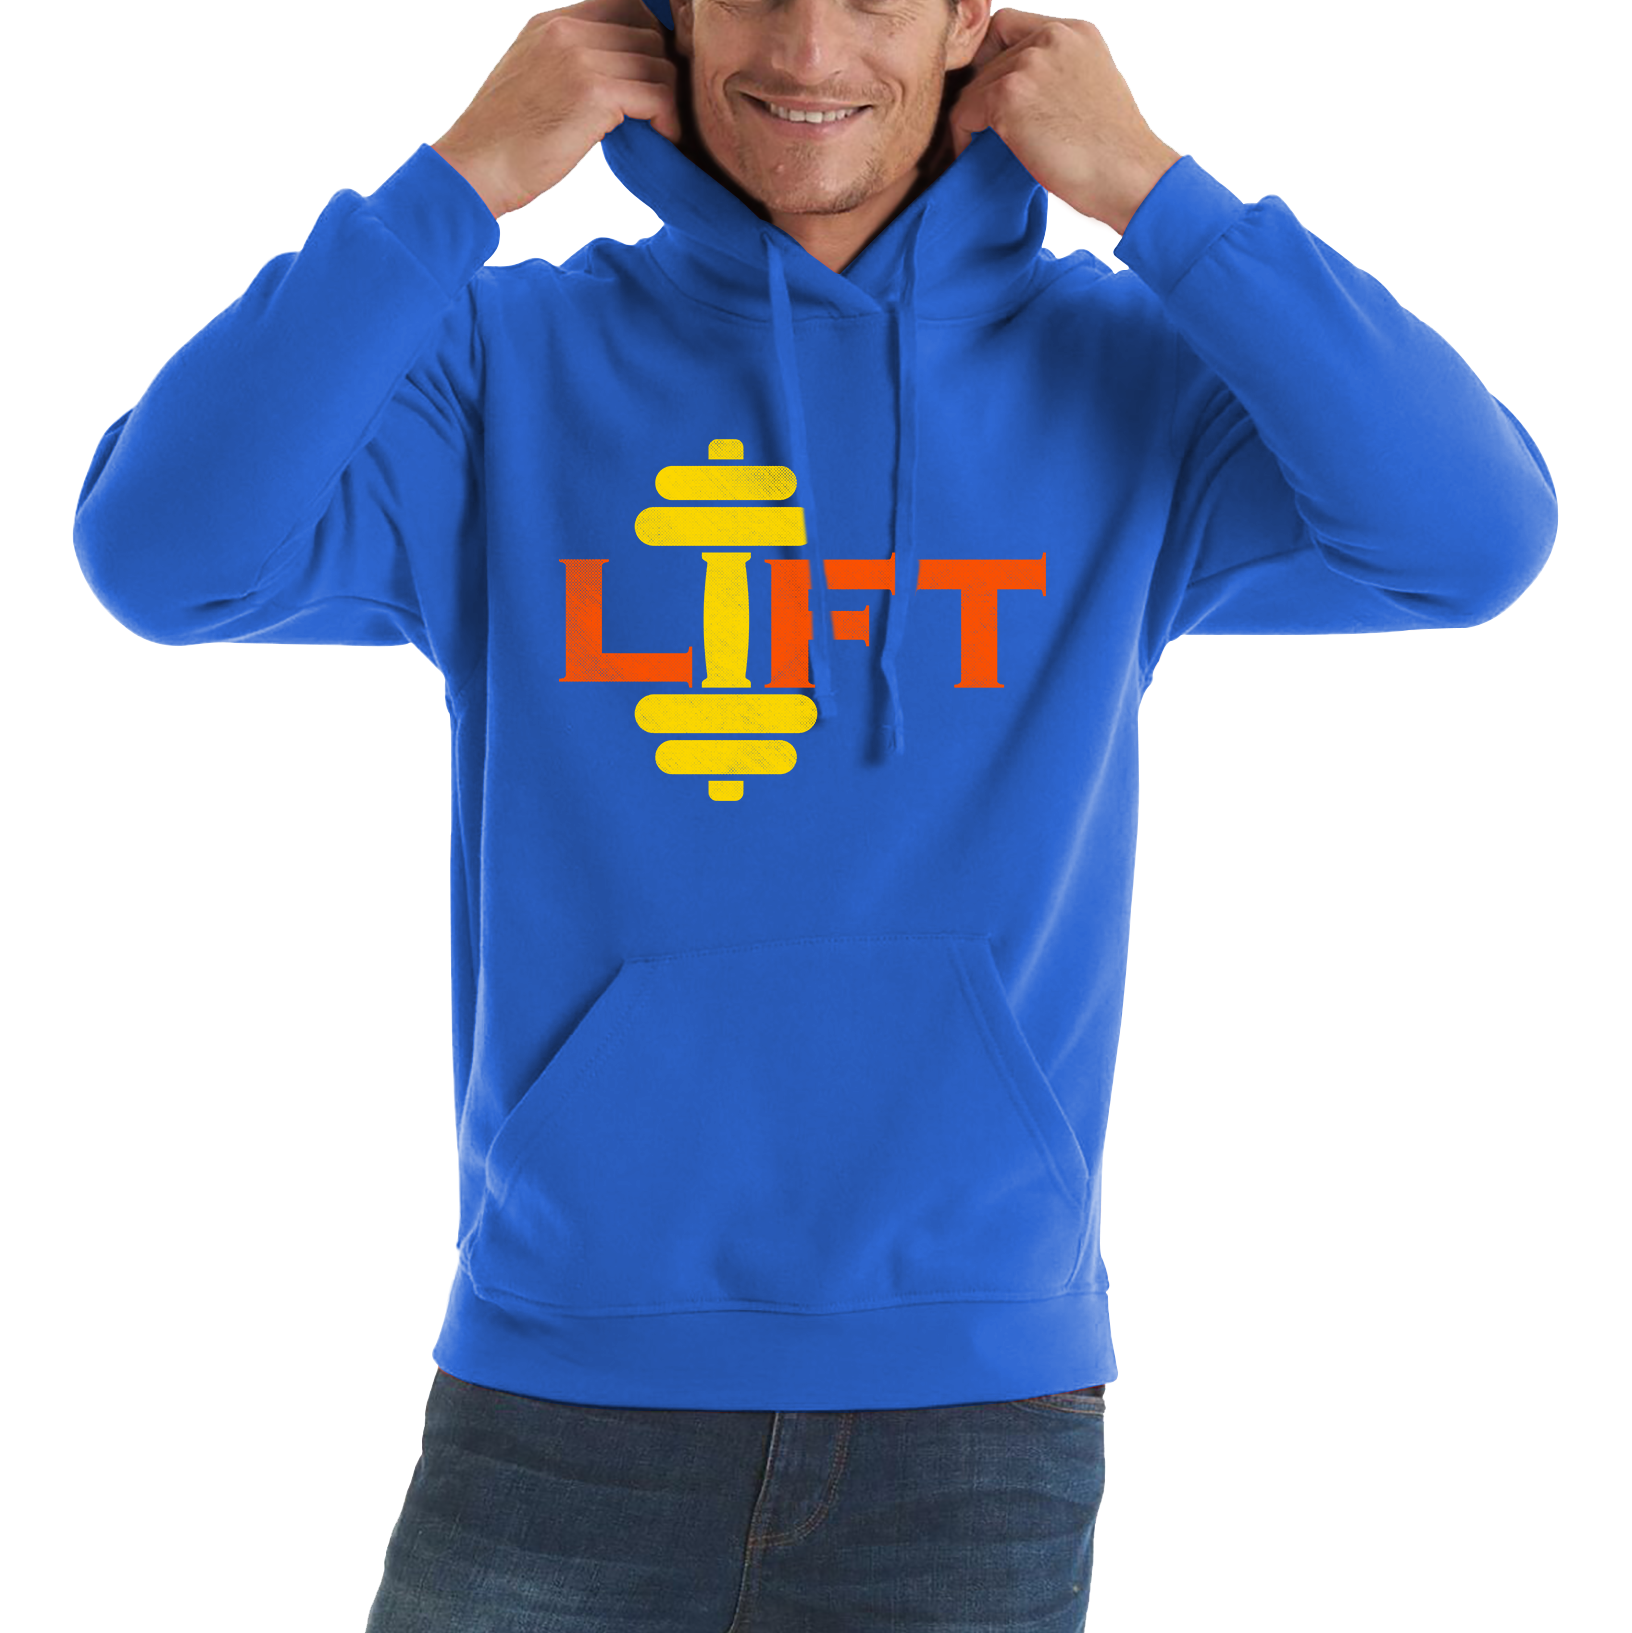 Lift Gym Training Workout Exercise Weight Lifting Dumbells Fitness Bodybuilding Unisex Hoodie